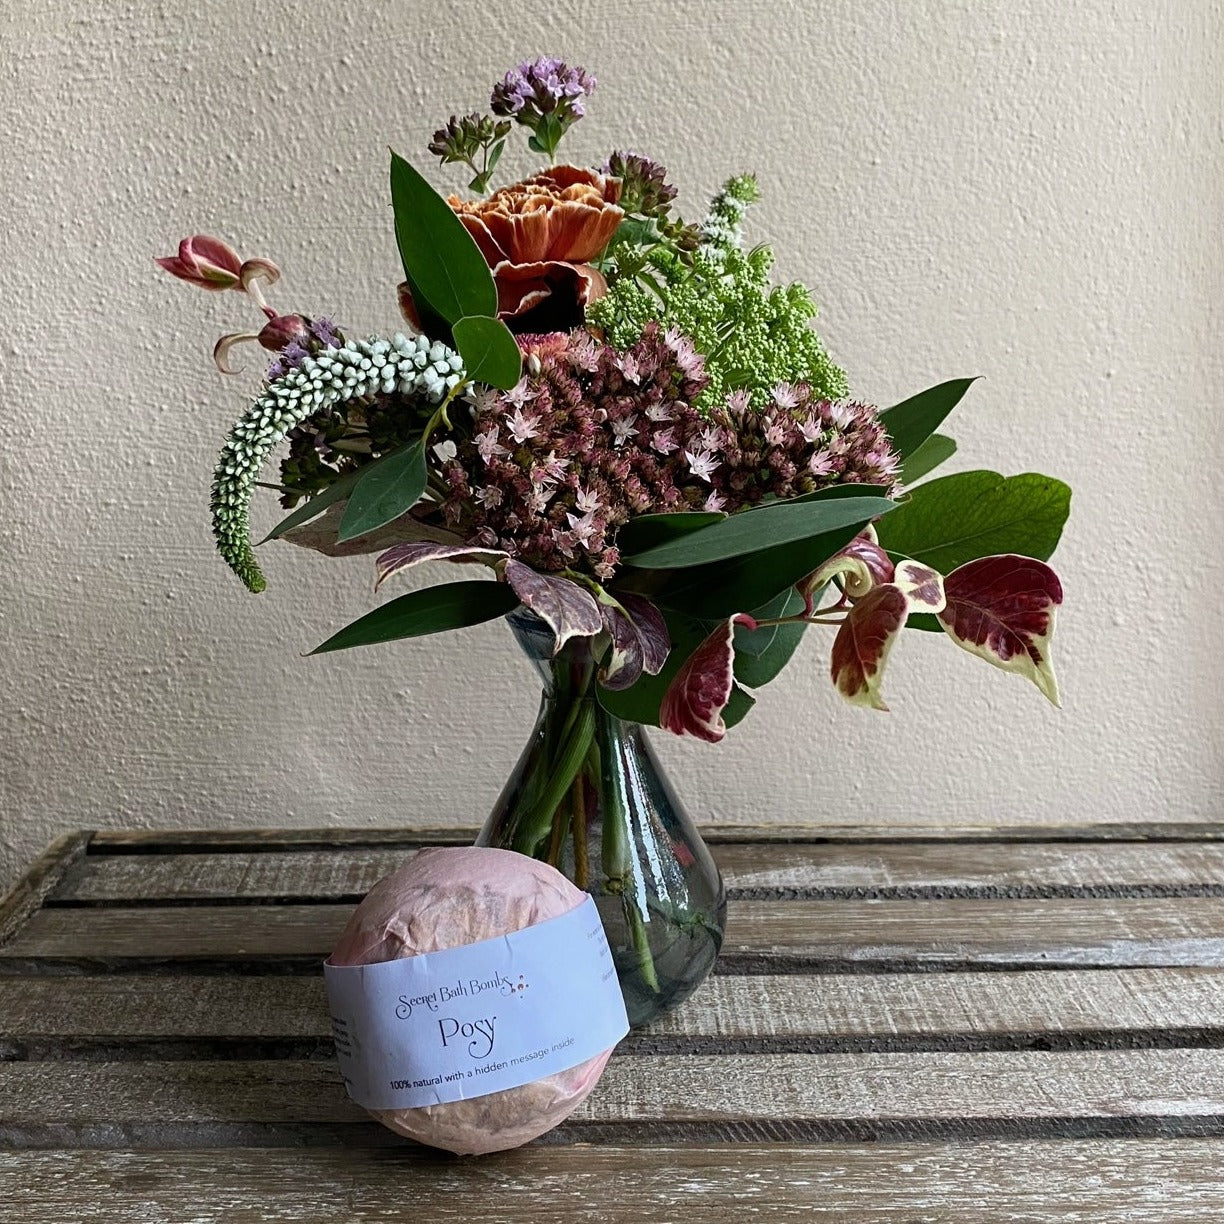 Recycled Glass Vase With Posy and Secret Bath Bomb Gift Box